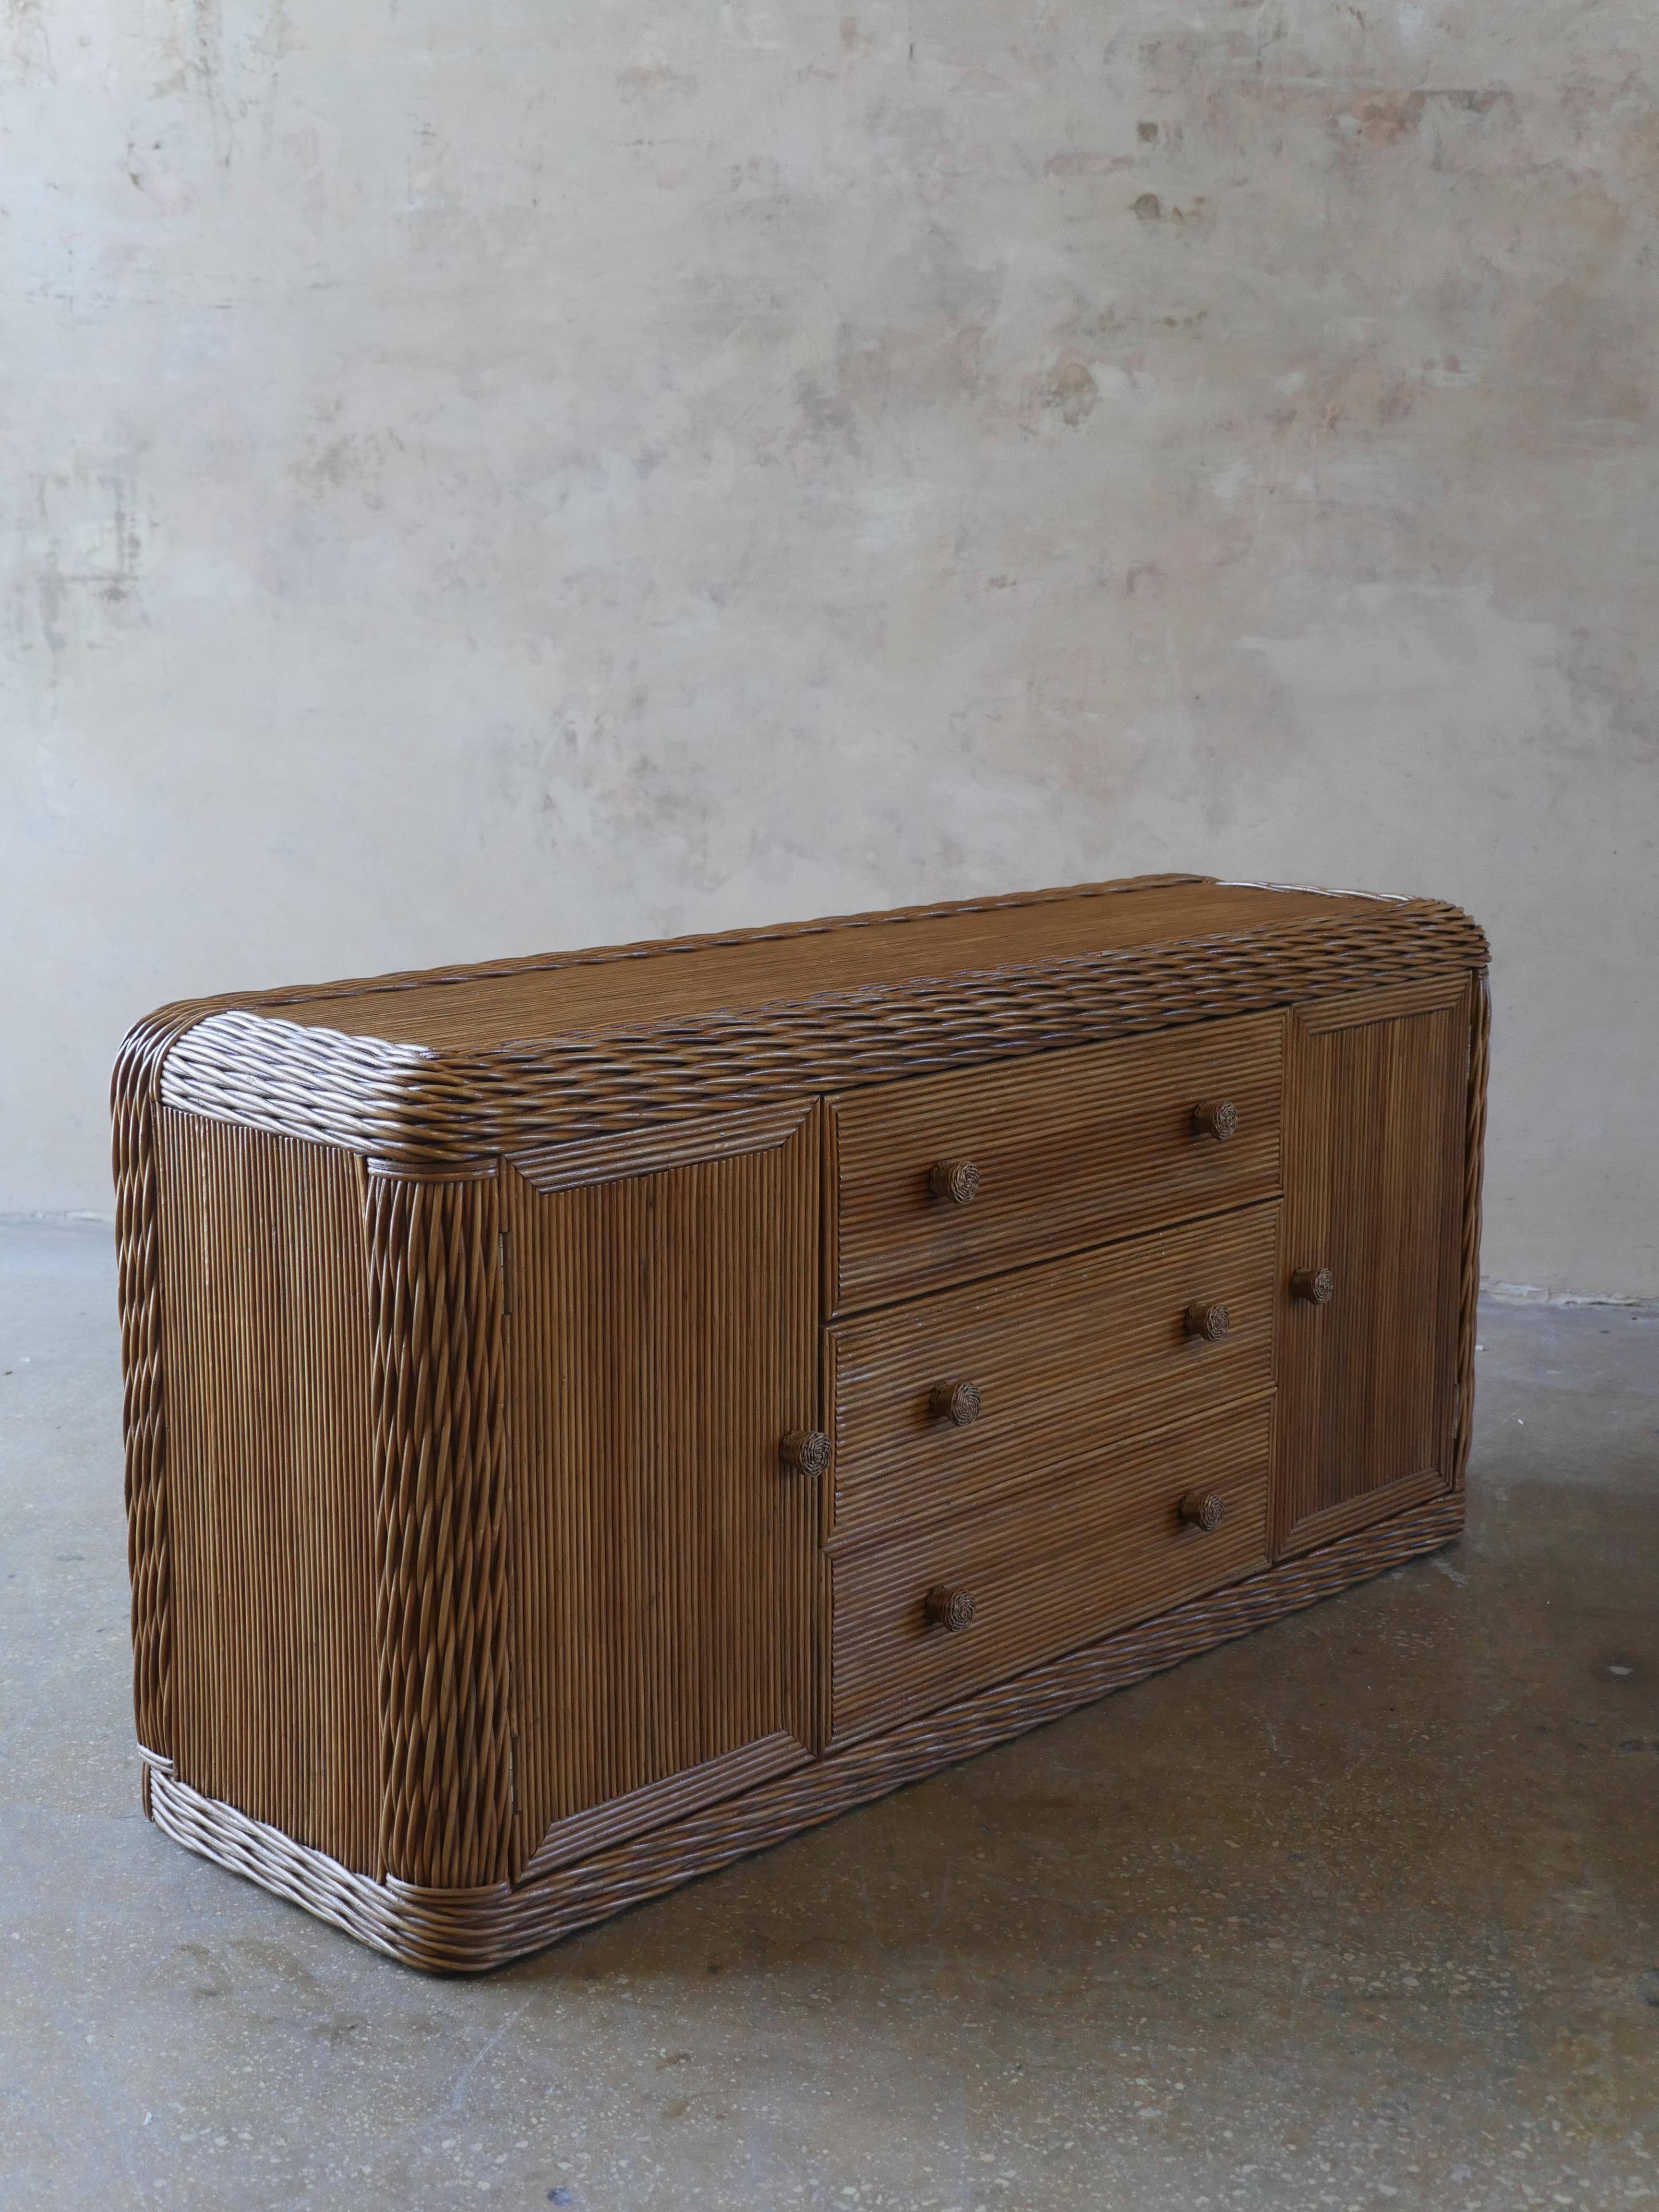 Beautiful coastal, braided wicker and pencil reed rattan credenza. The intricately designed credenza adds a nice touch of warmth and boho chic style to any space.